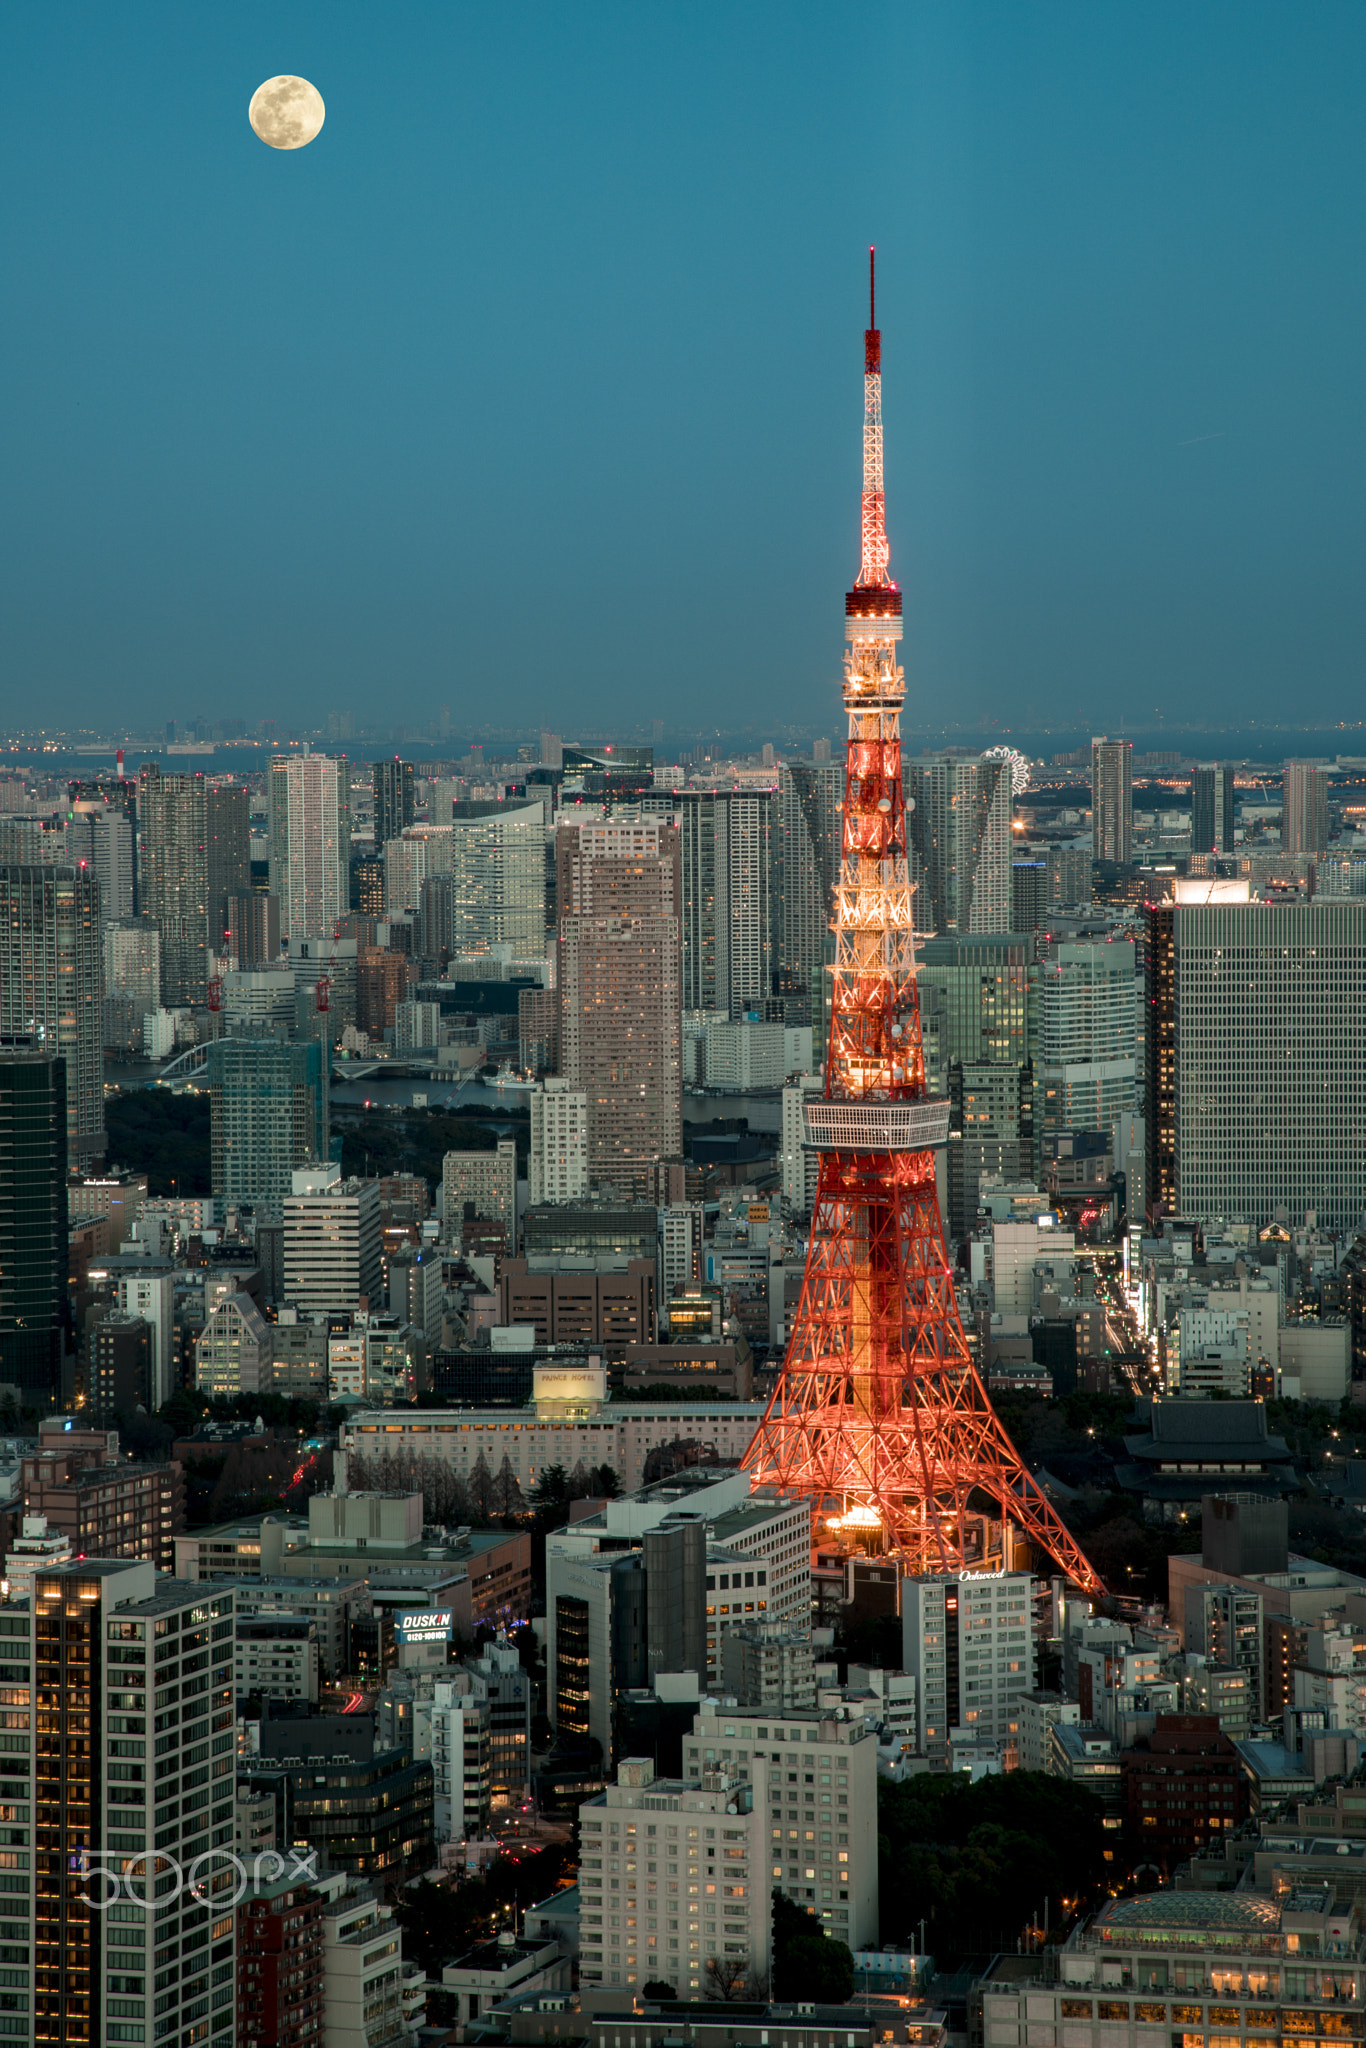 Tokyo tower and moon